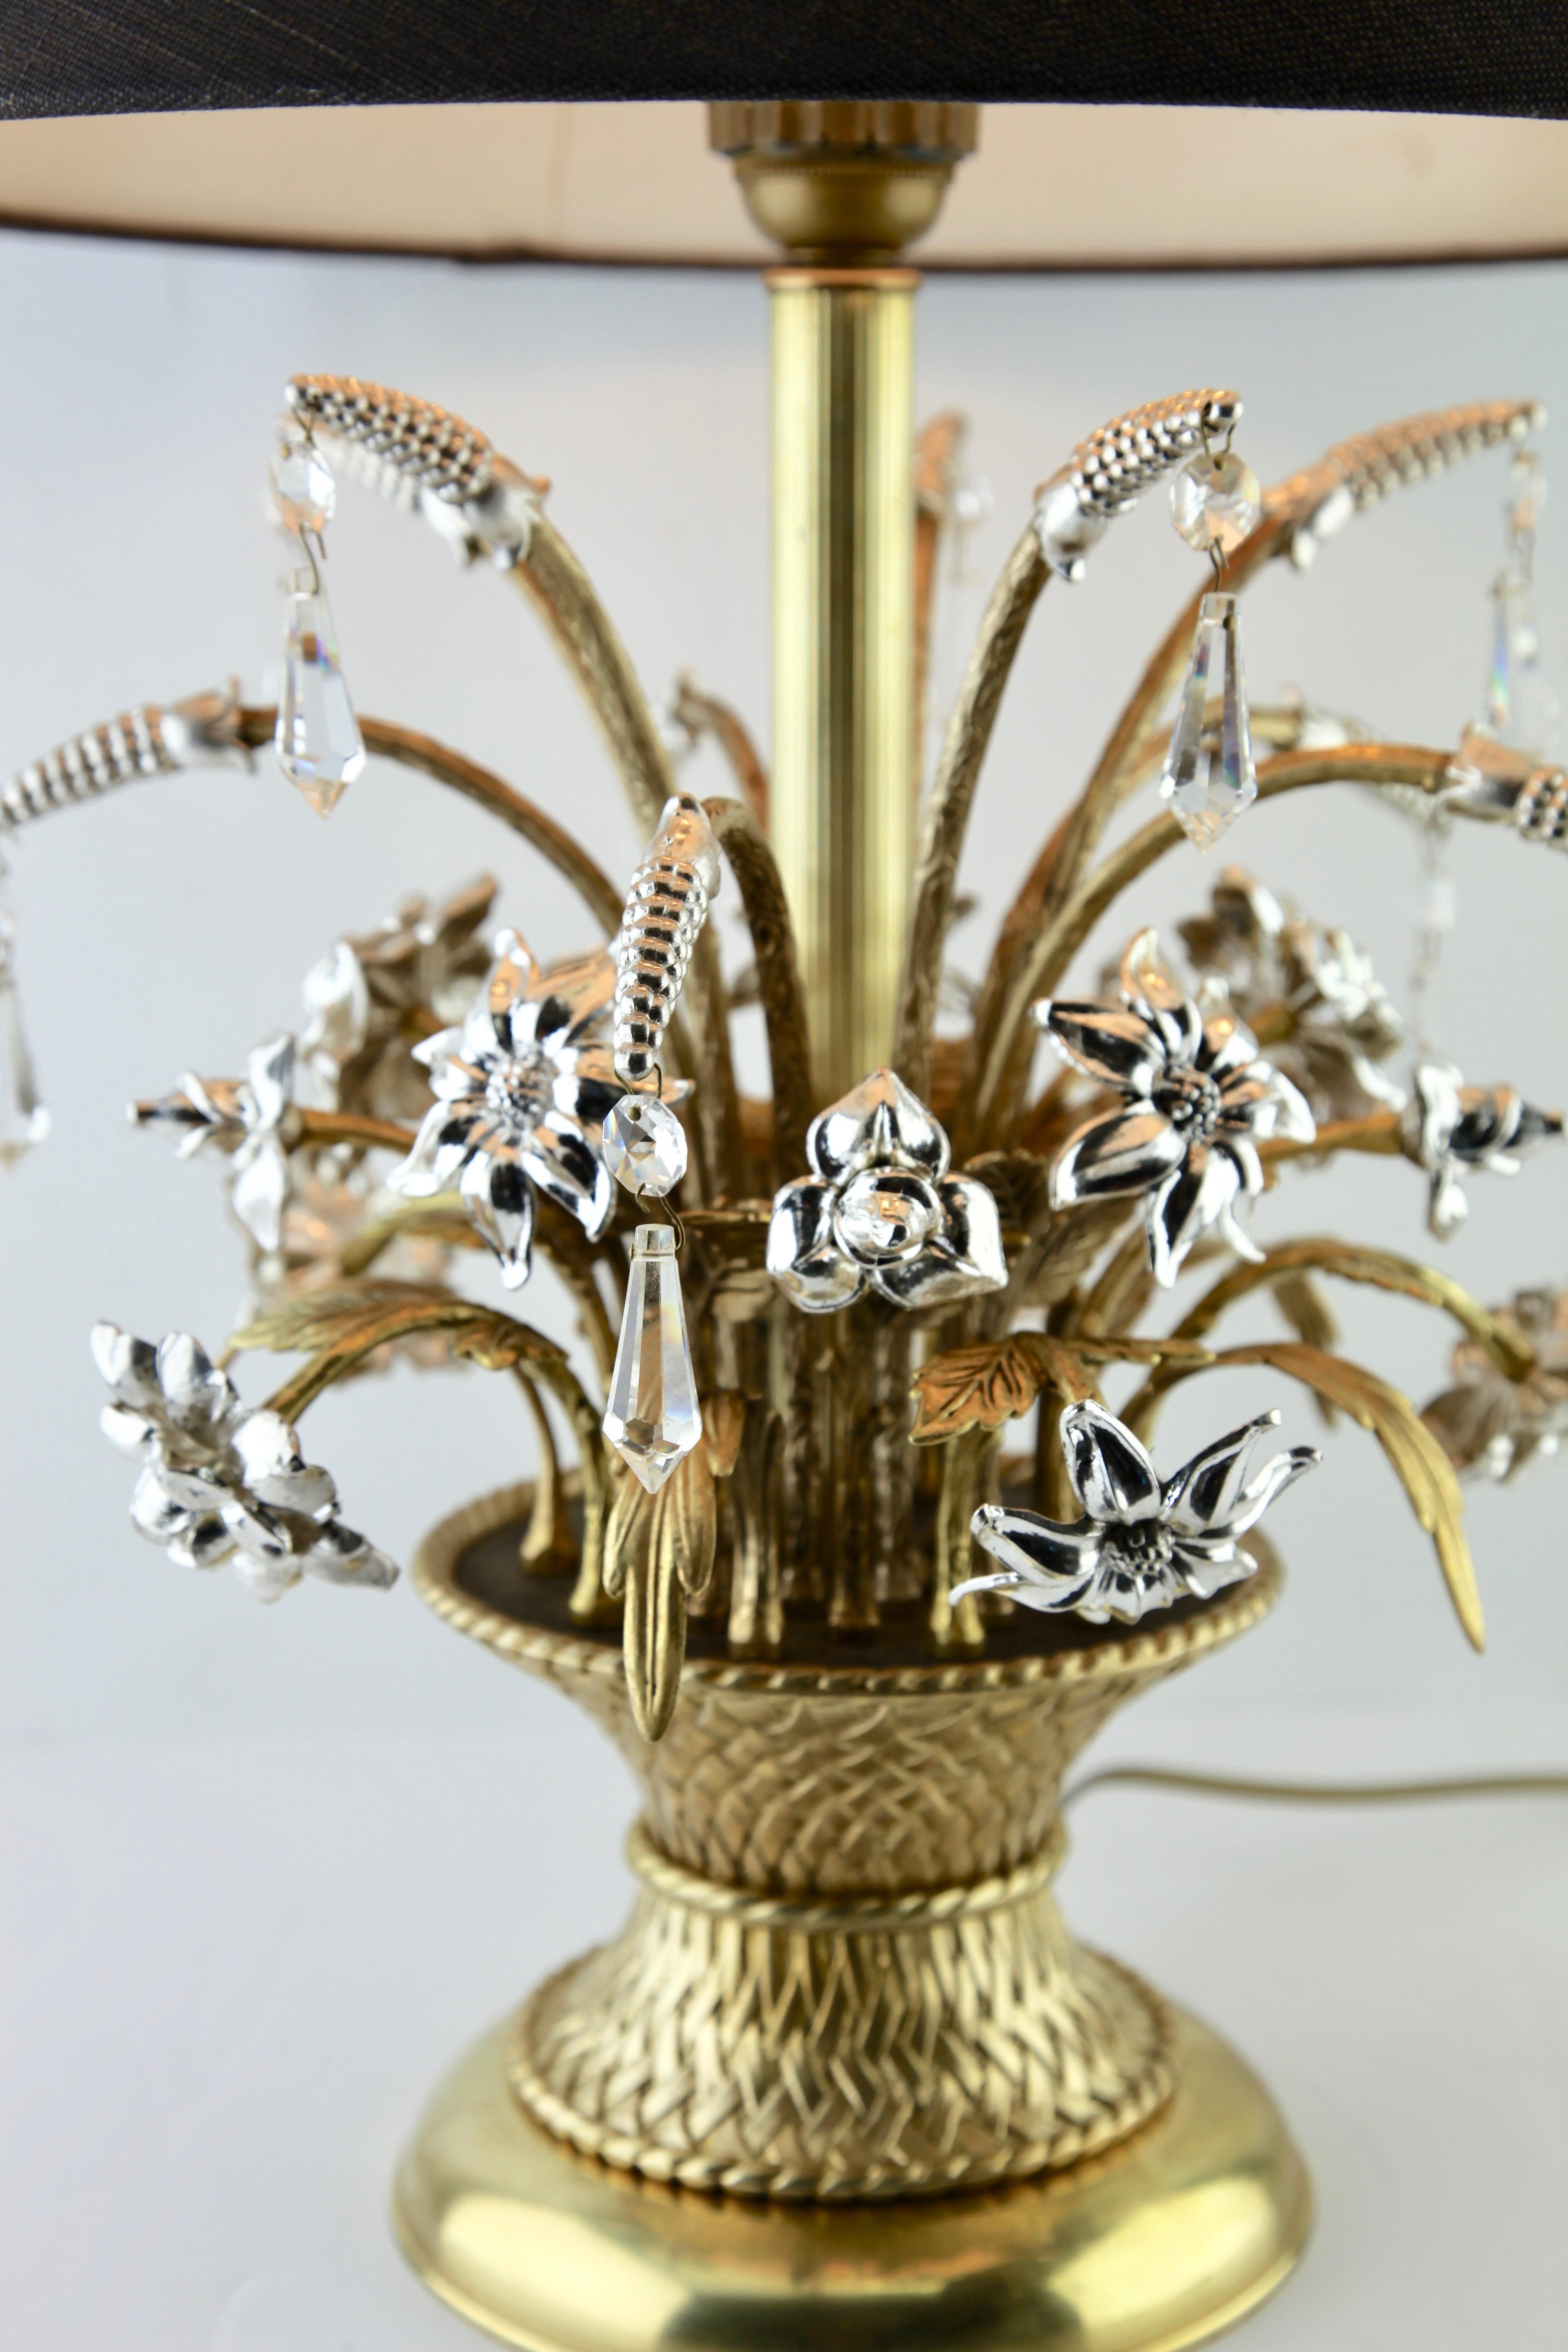 Mid-20th Century Lamp Representing a Bouquet of Brass and Silver Metal Flowers in a Basket, 1960s For Sale